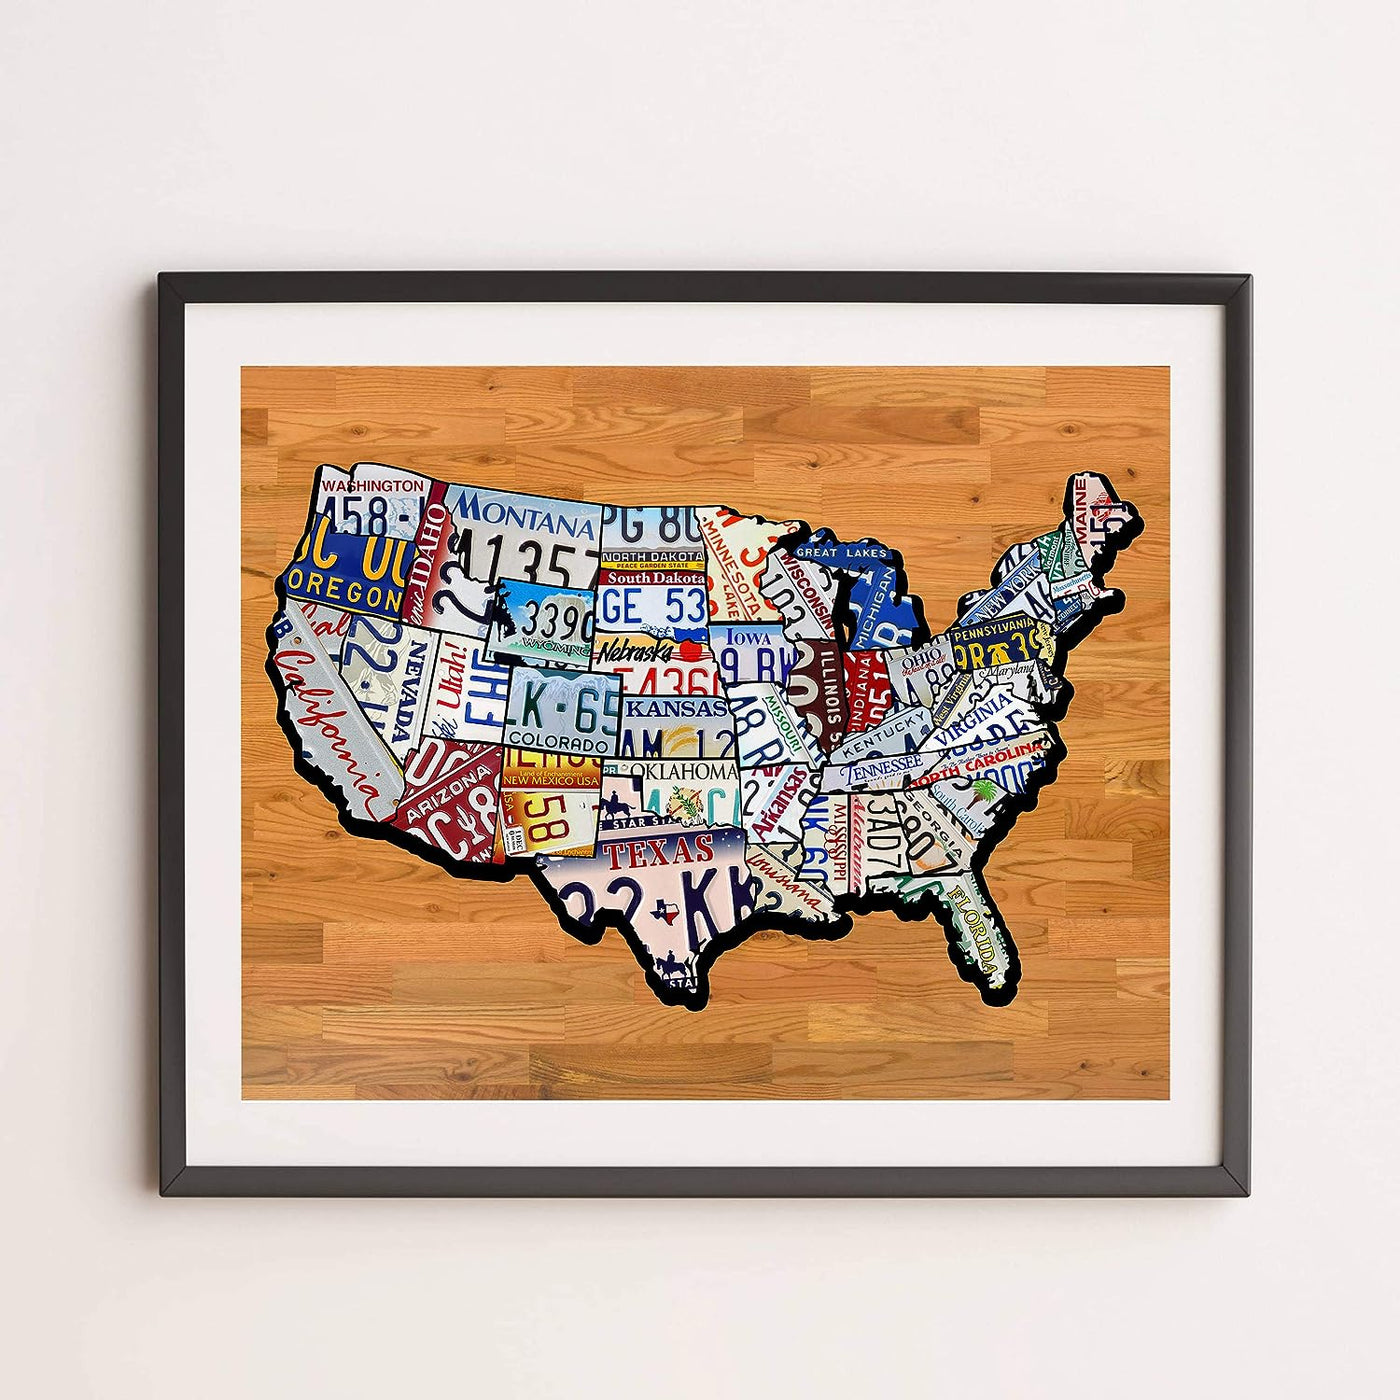 United States License Plates -American State Wall Art -14 x11" Rustic USA Travel Print w/Wood Design-Ready to Frame. Vintage Home-Office-Garage-Cave-Shop Decor. Great Gift! Printed on Photo Paper.